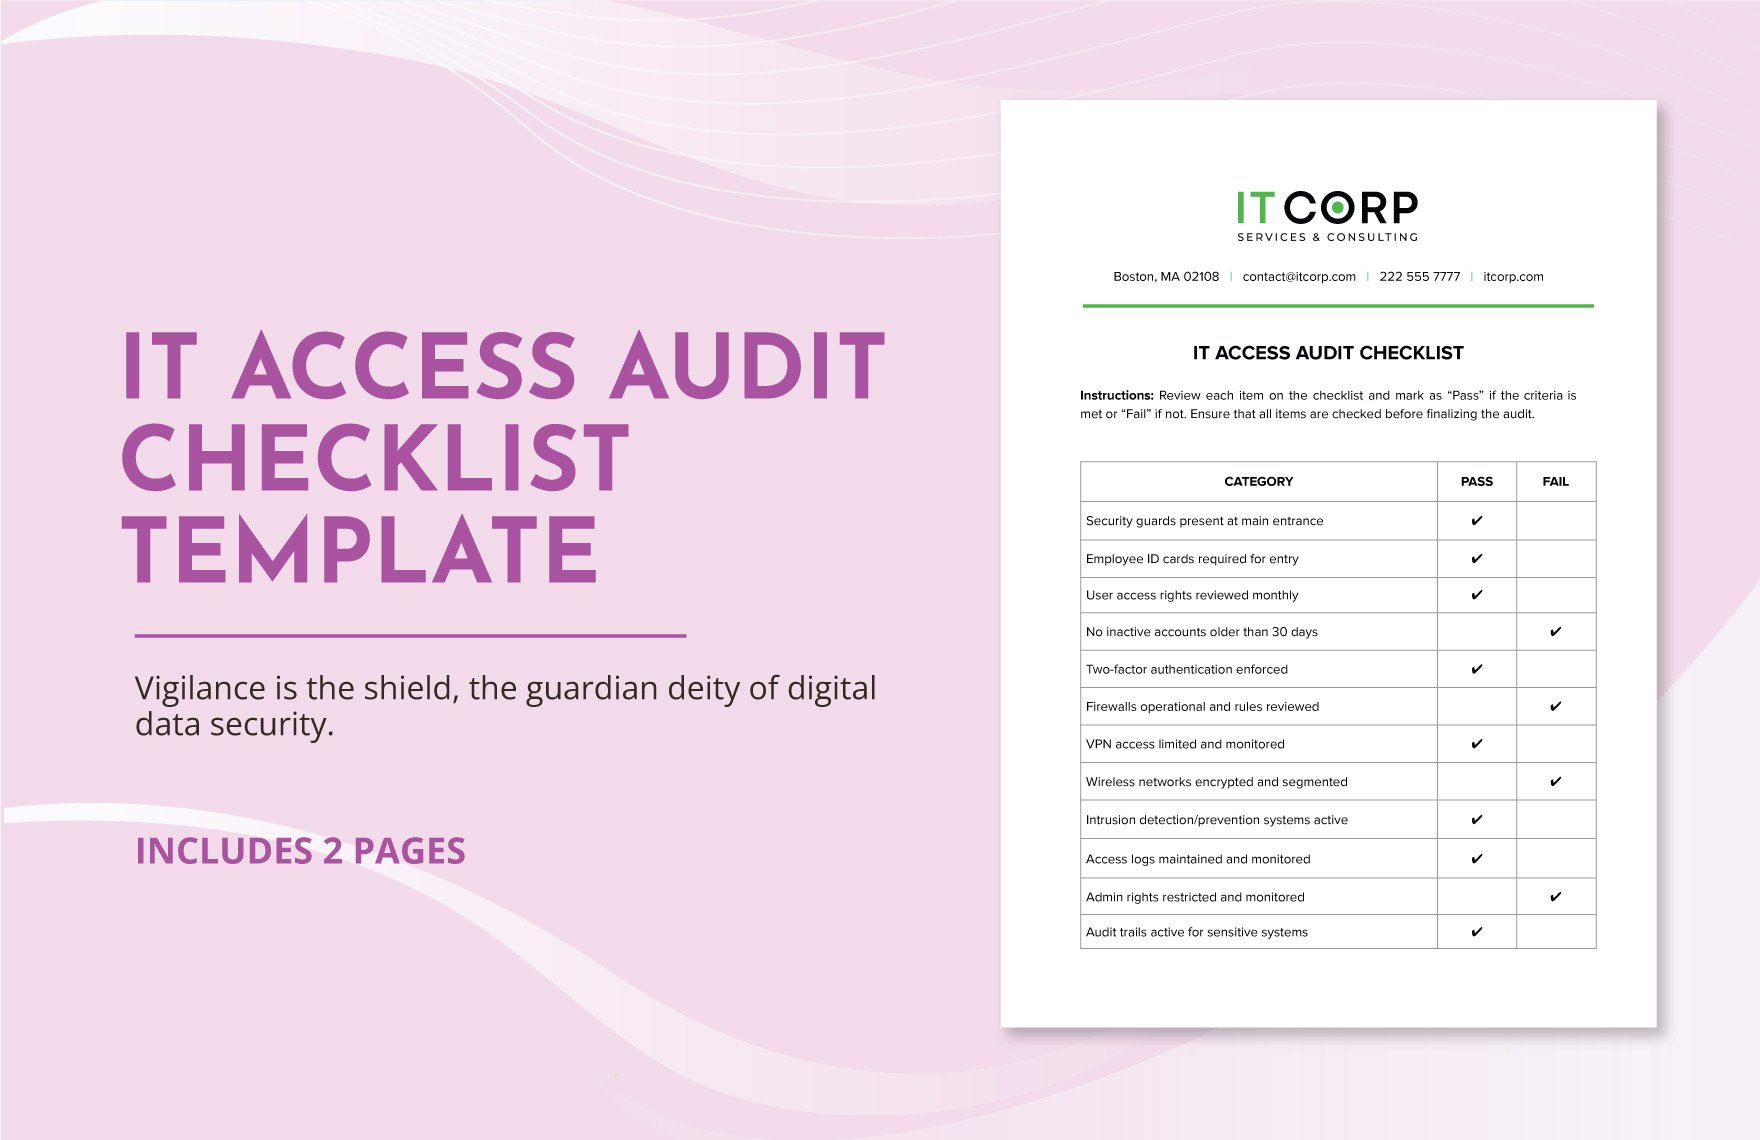 IT Access Audit Checklist Template in Word, Google Docs, PDF